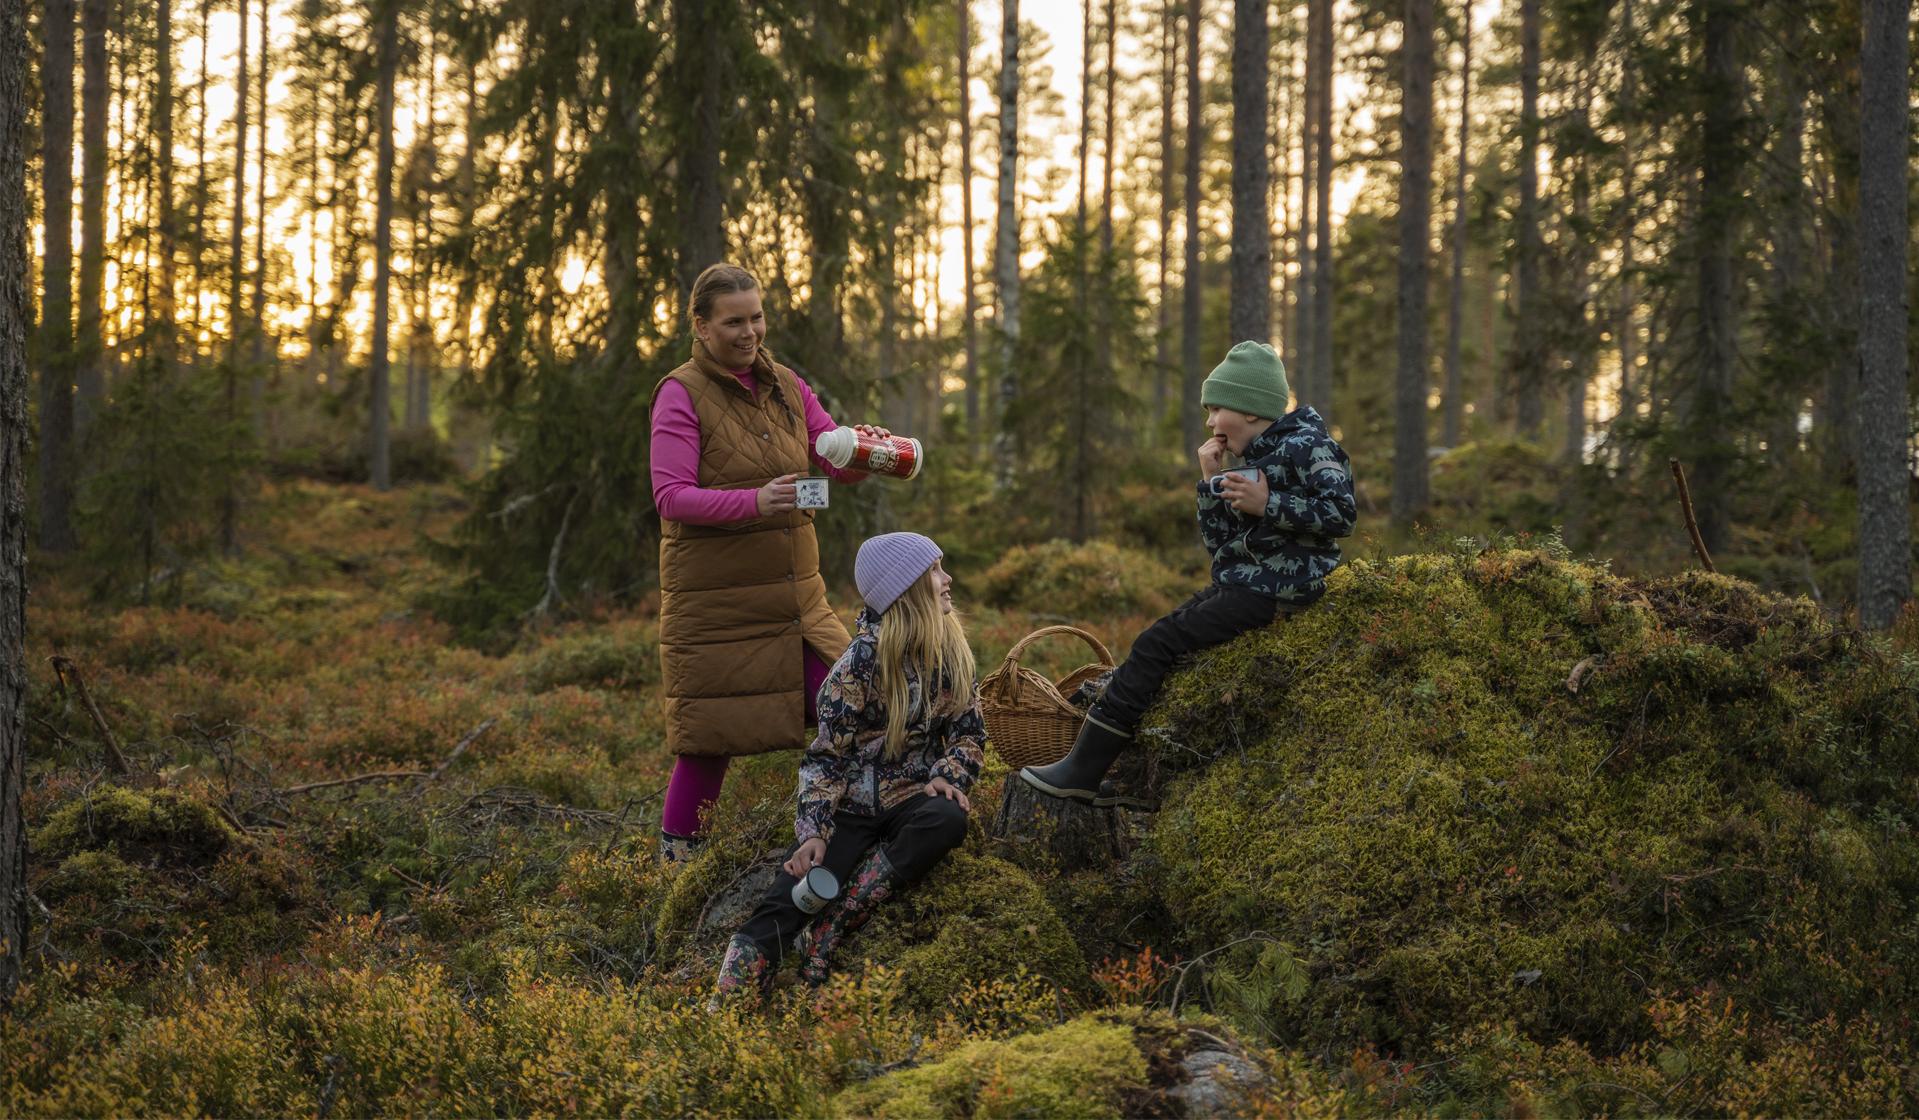 A woman and two children on a hike in the forest.